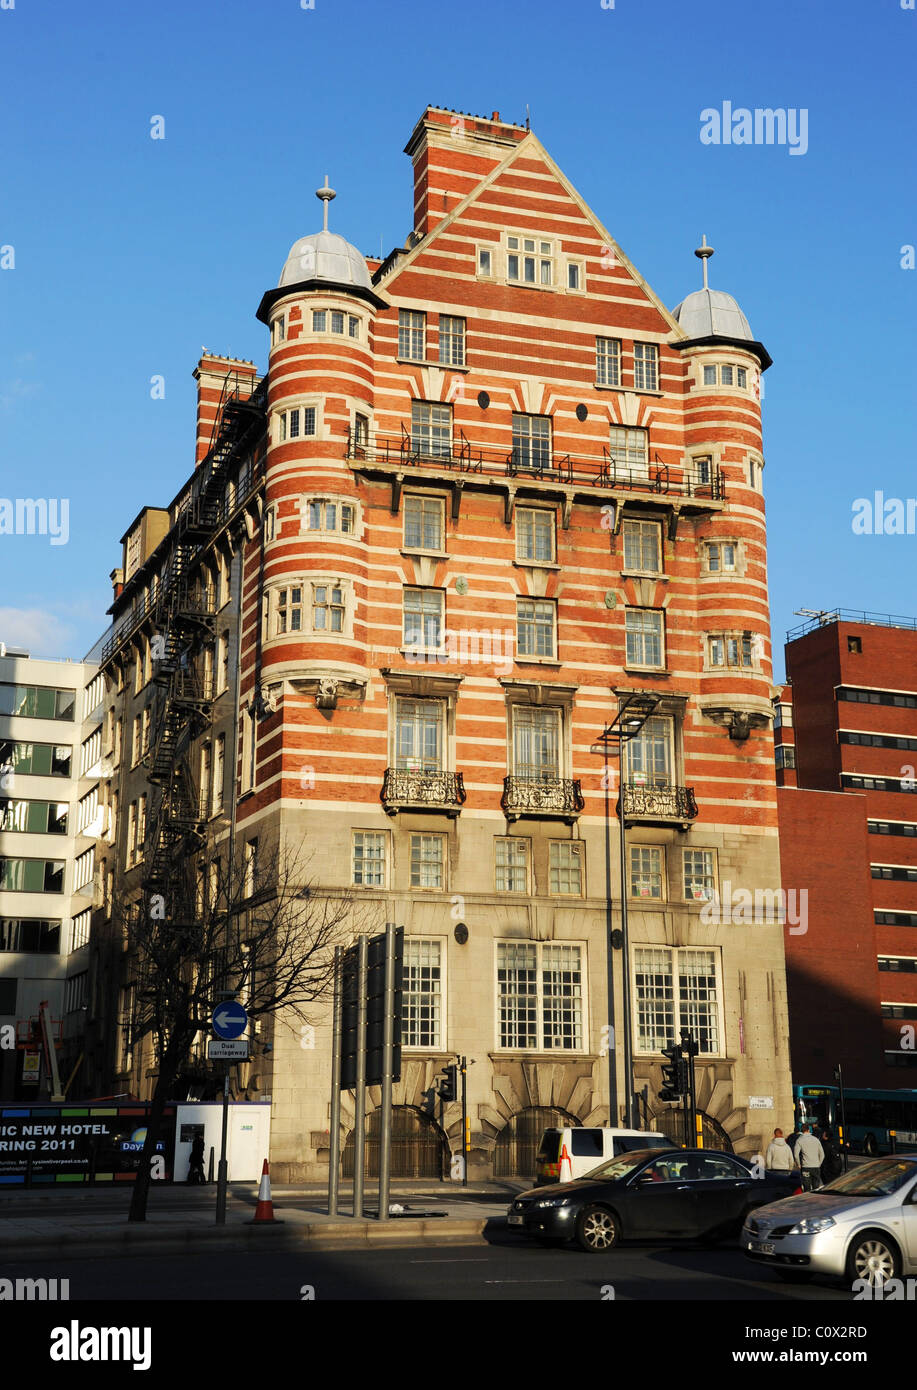 The White Star Line building, Liverpool, UK. The sinking of the Titanic was announced from one of the balconies. Stock Photo